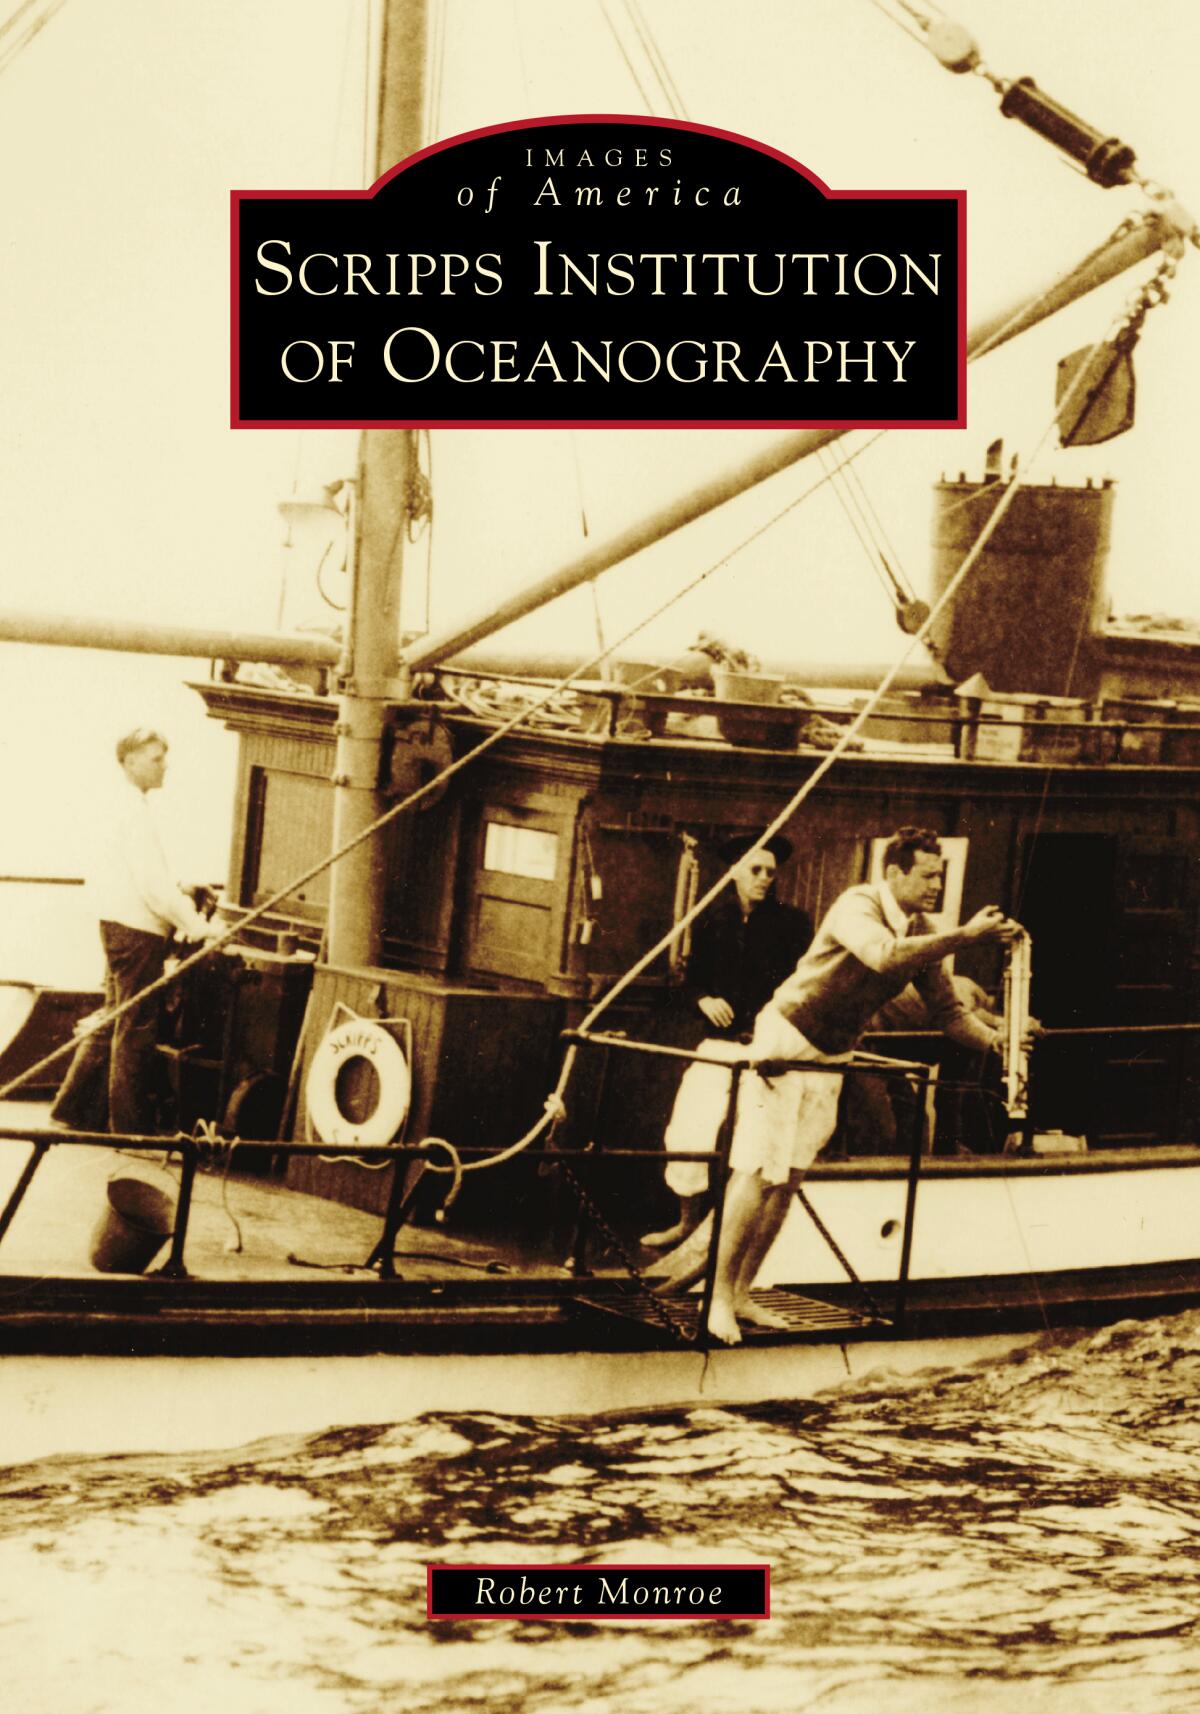 "Images of America: Scripps Institution of Oceanography" will be available for purchase through Arcadia Publishing.